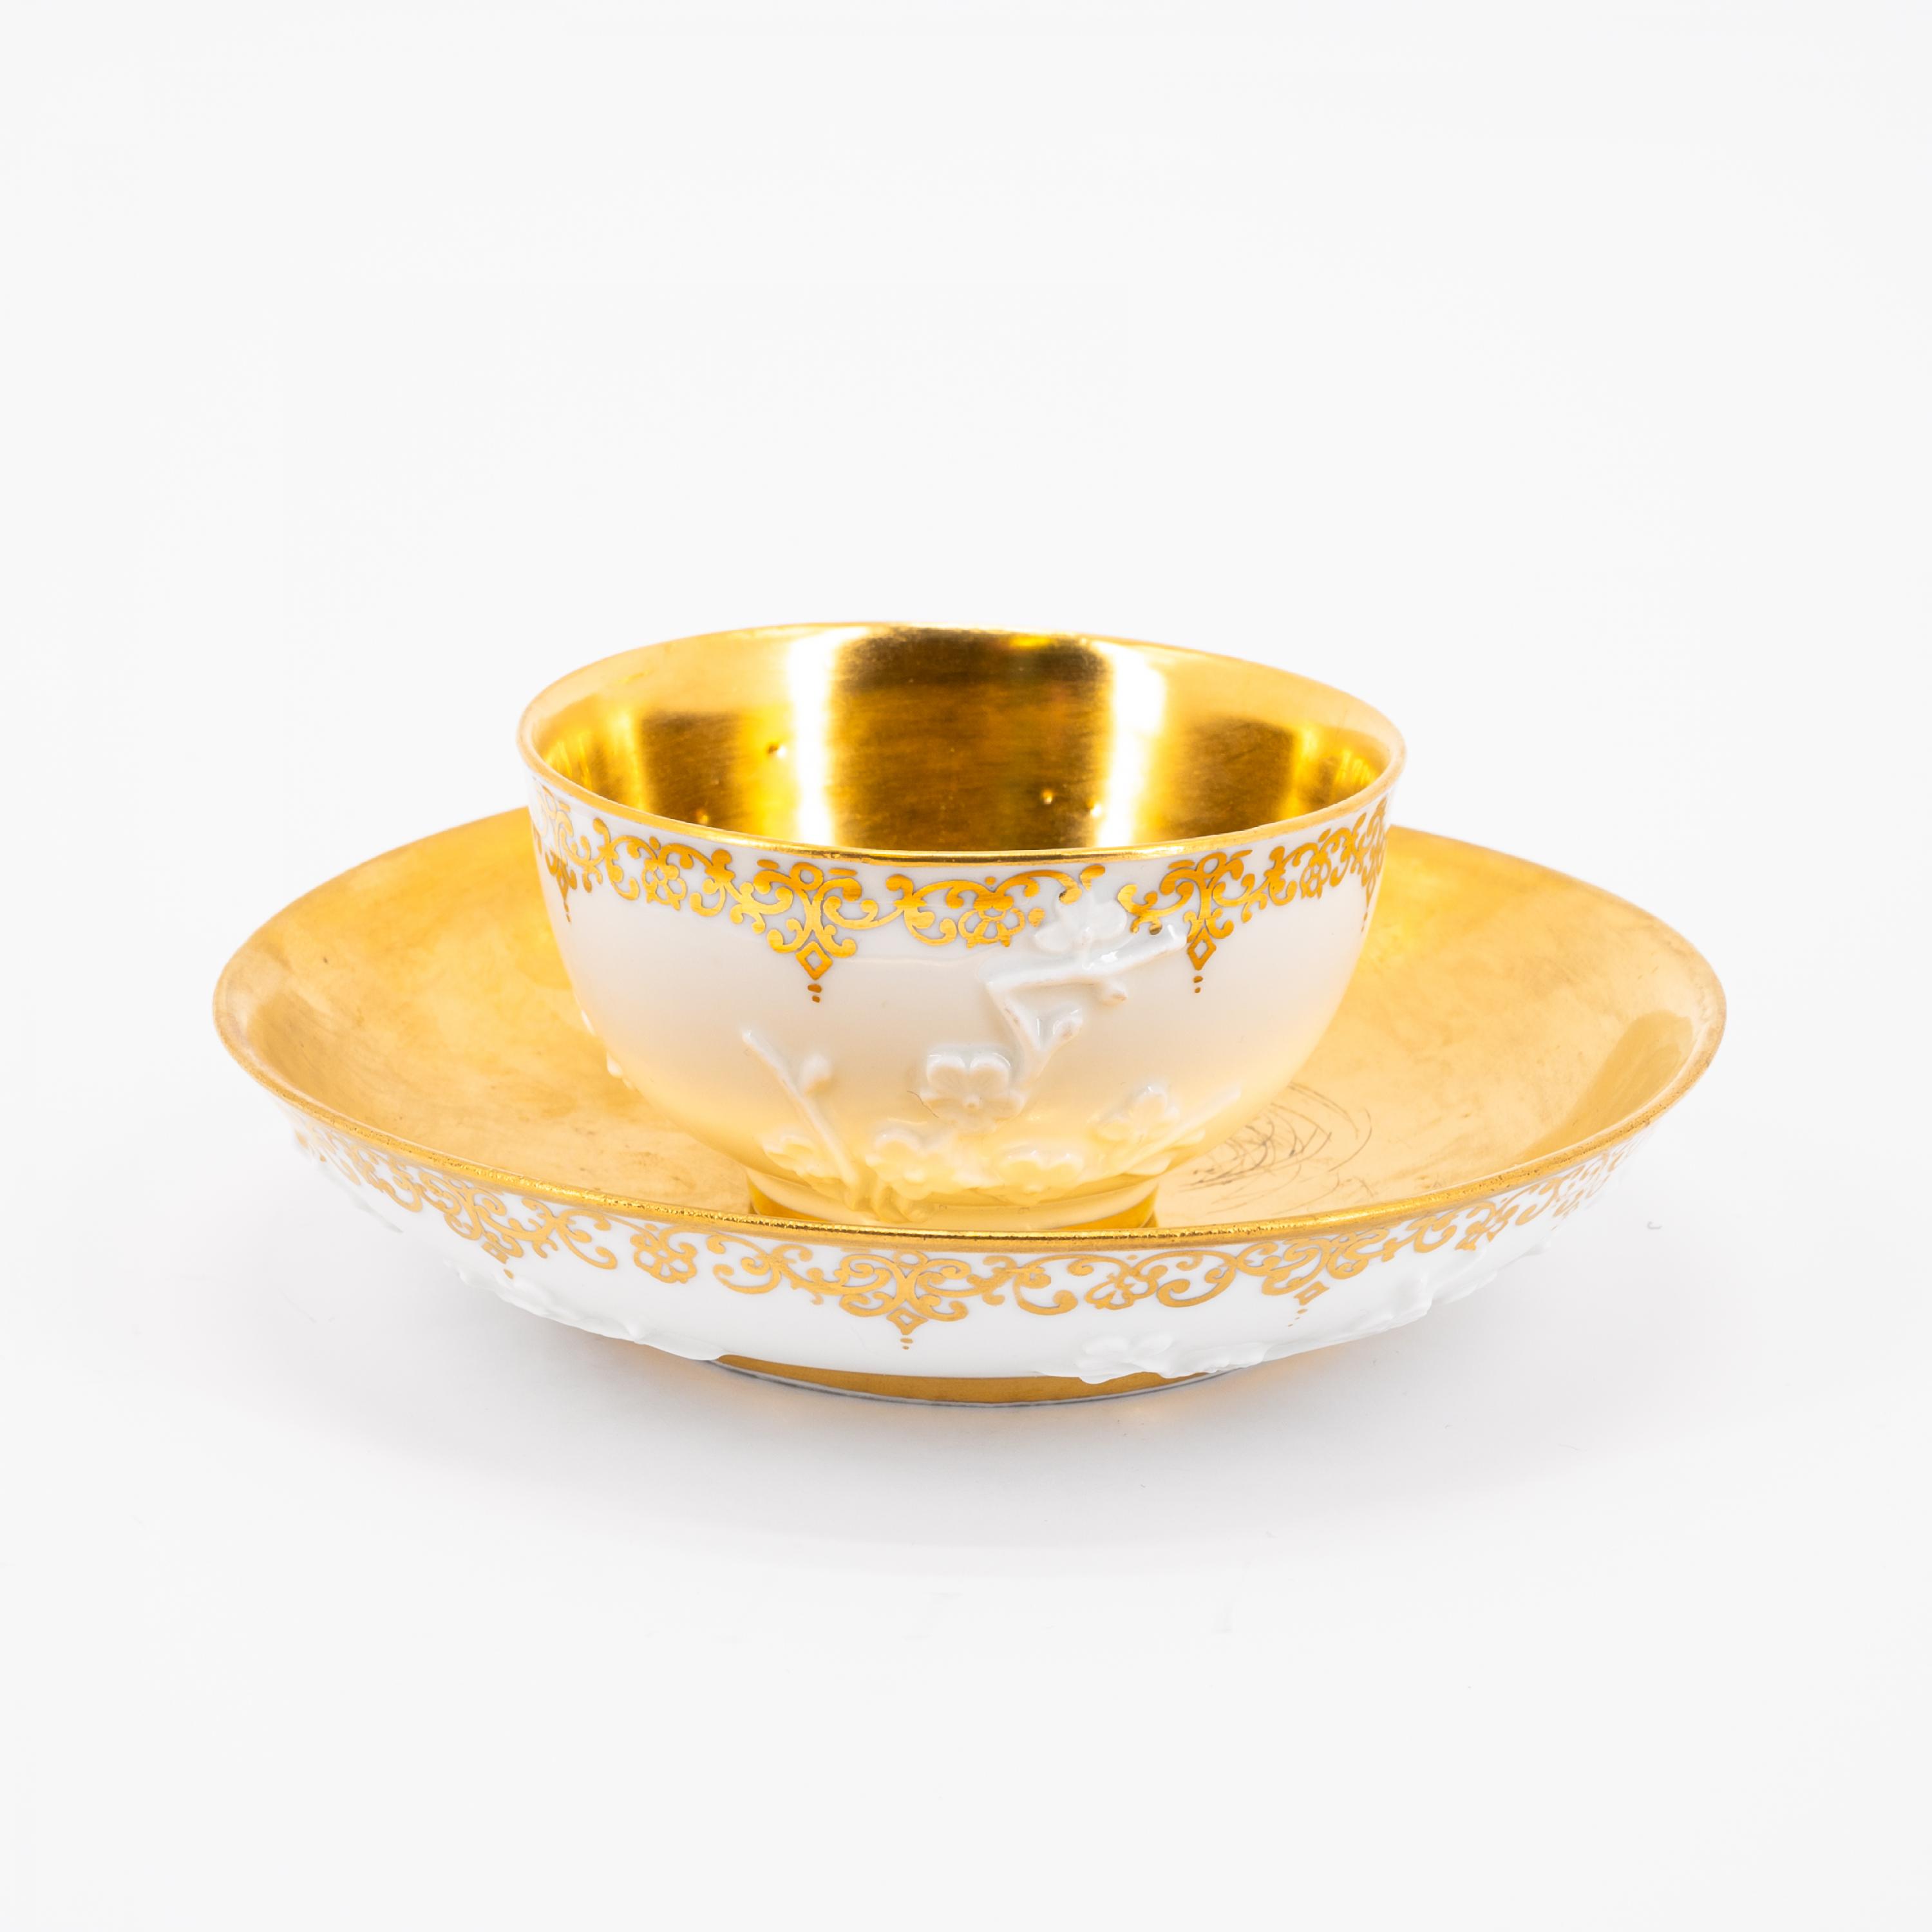 PORCELAIN ENSEMBLE OF SLOP BOWL, TWO CUPS AND SAUCERS WITH GILDED DECOR - Image 9 of 16